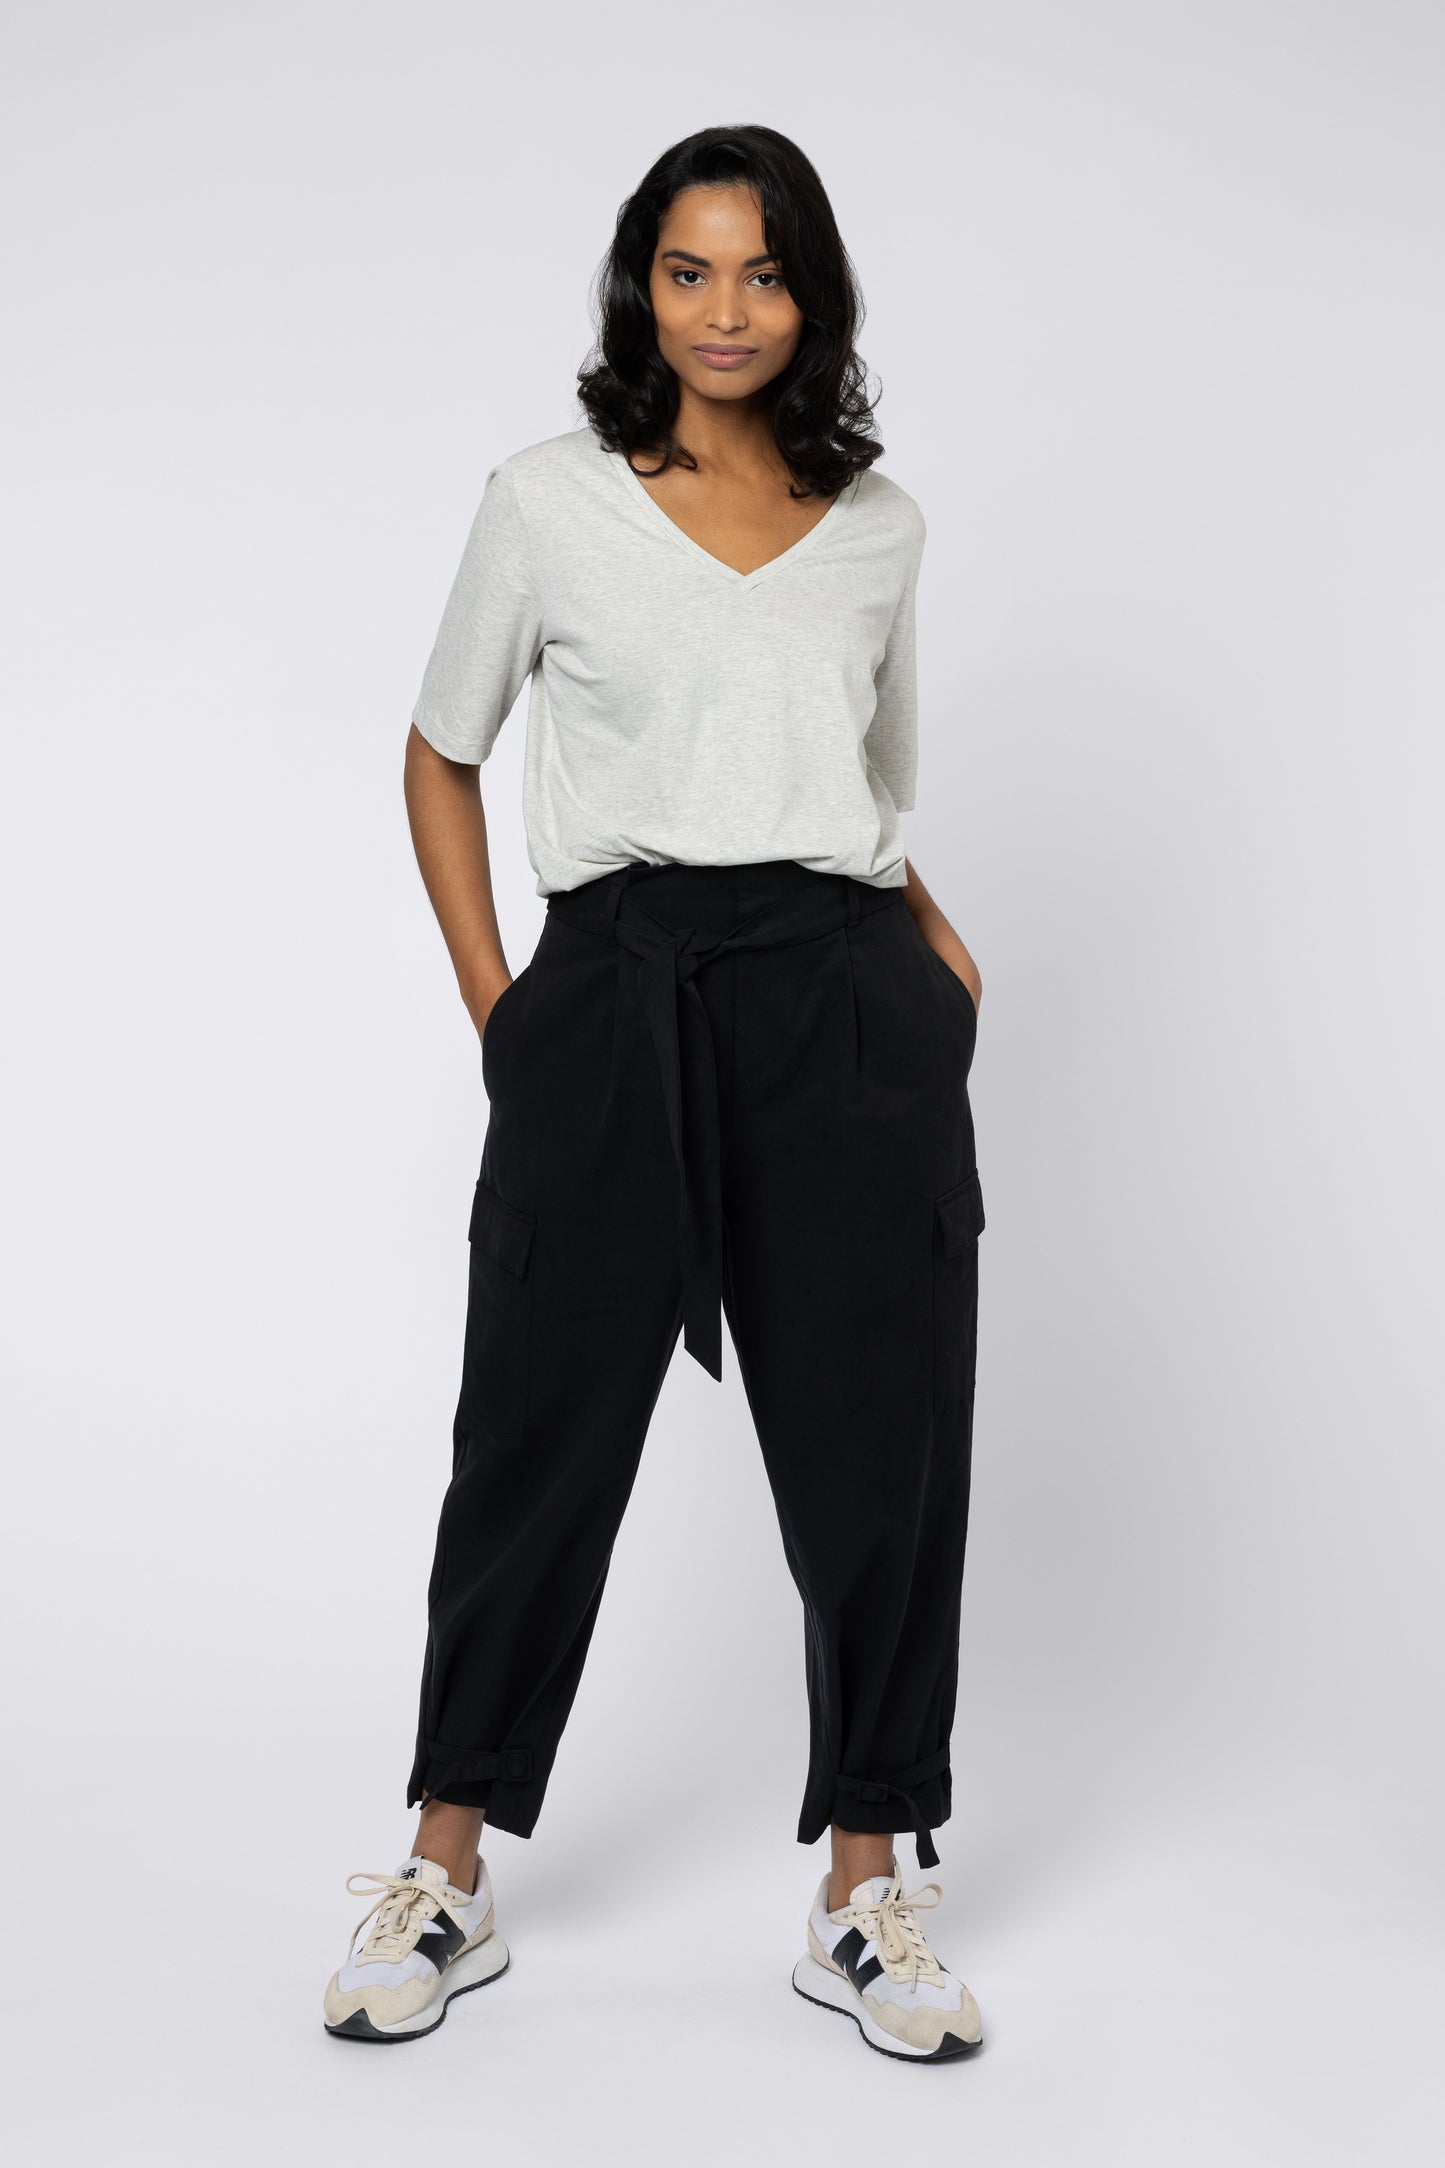 CHARLOTTE CARGO TROUSER BLACK CARGO TROUSERS SUSTAINABLE CAGO PANTS SPRING ELEVENLOVES